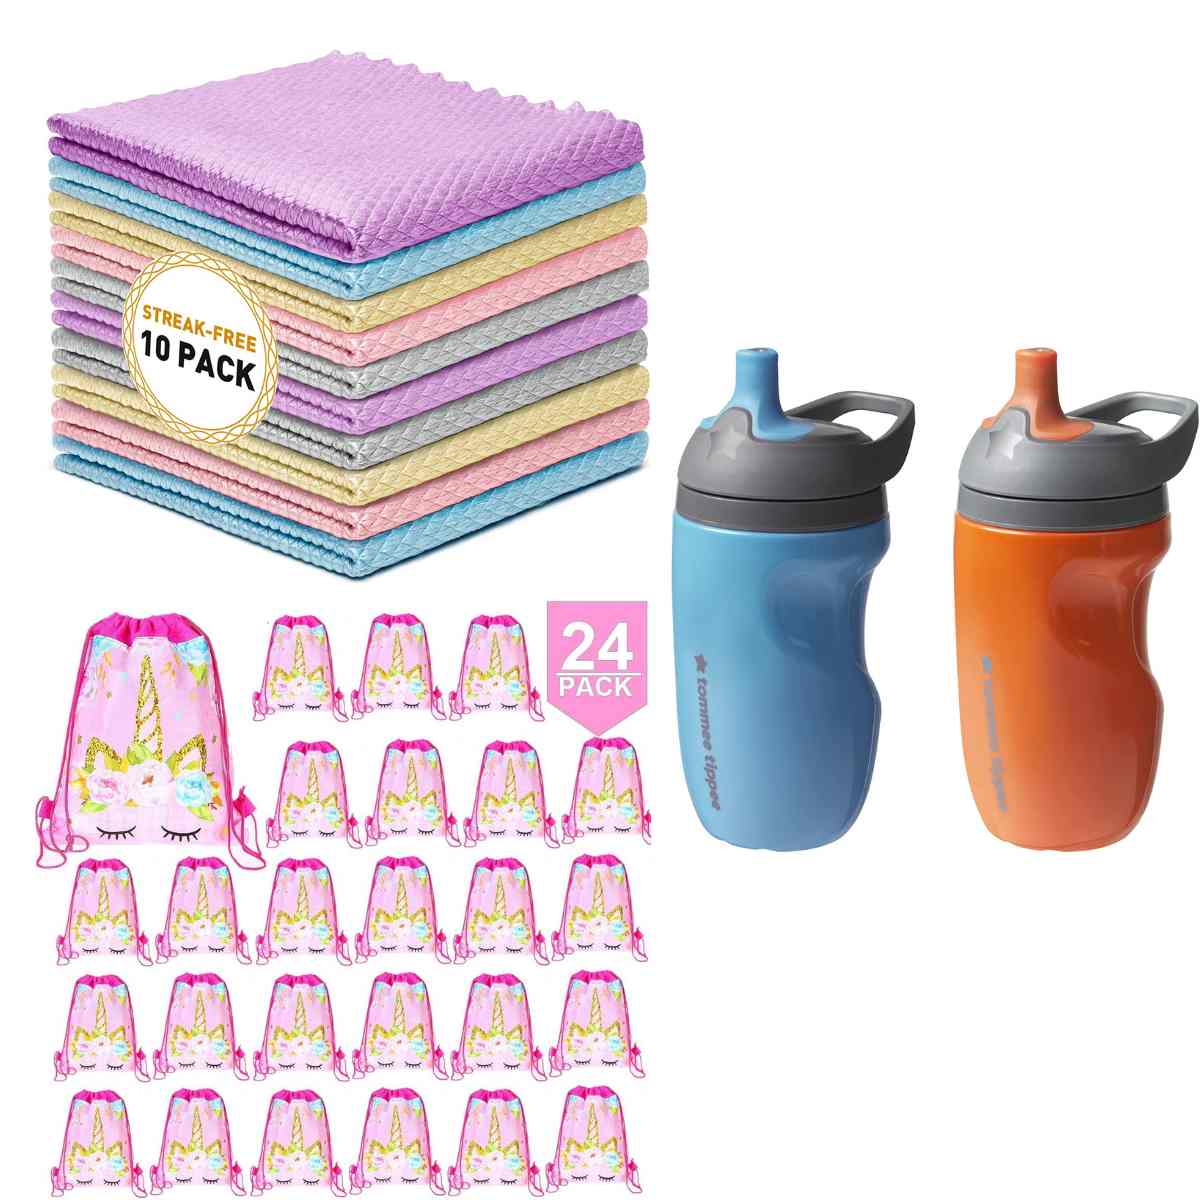 Cleaning Rags; Sippy Cups: Unicorn Favor bags